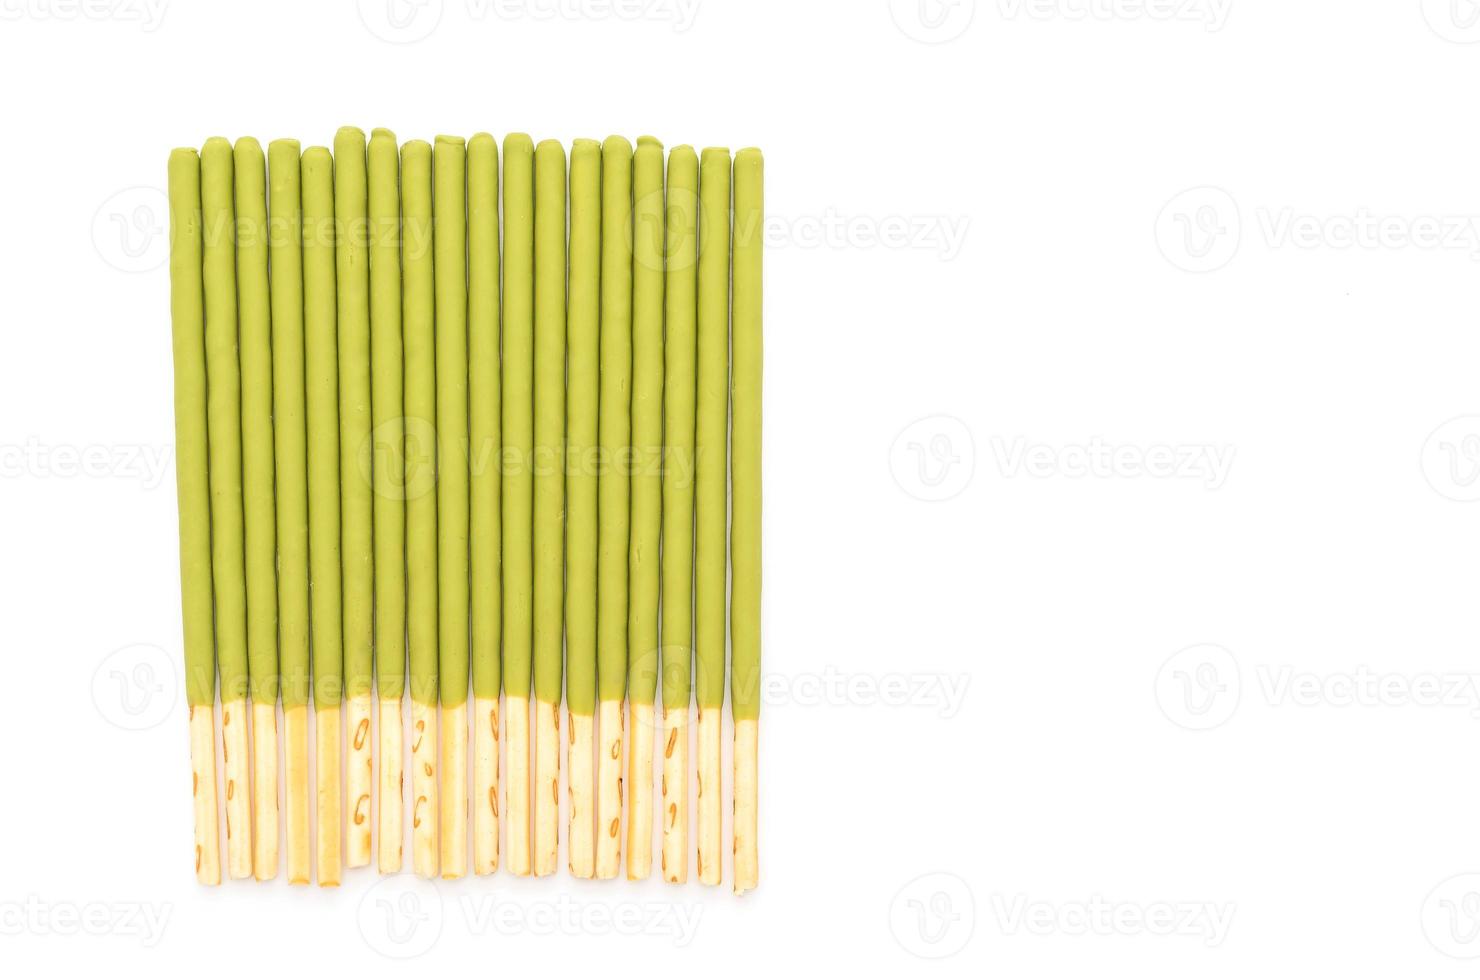 Biscuit stick with green tea flavored on white background photo